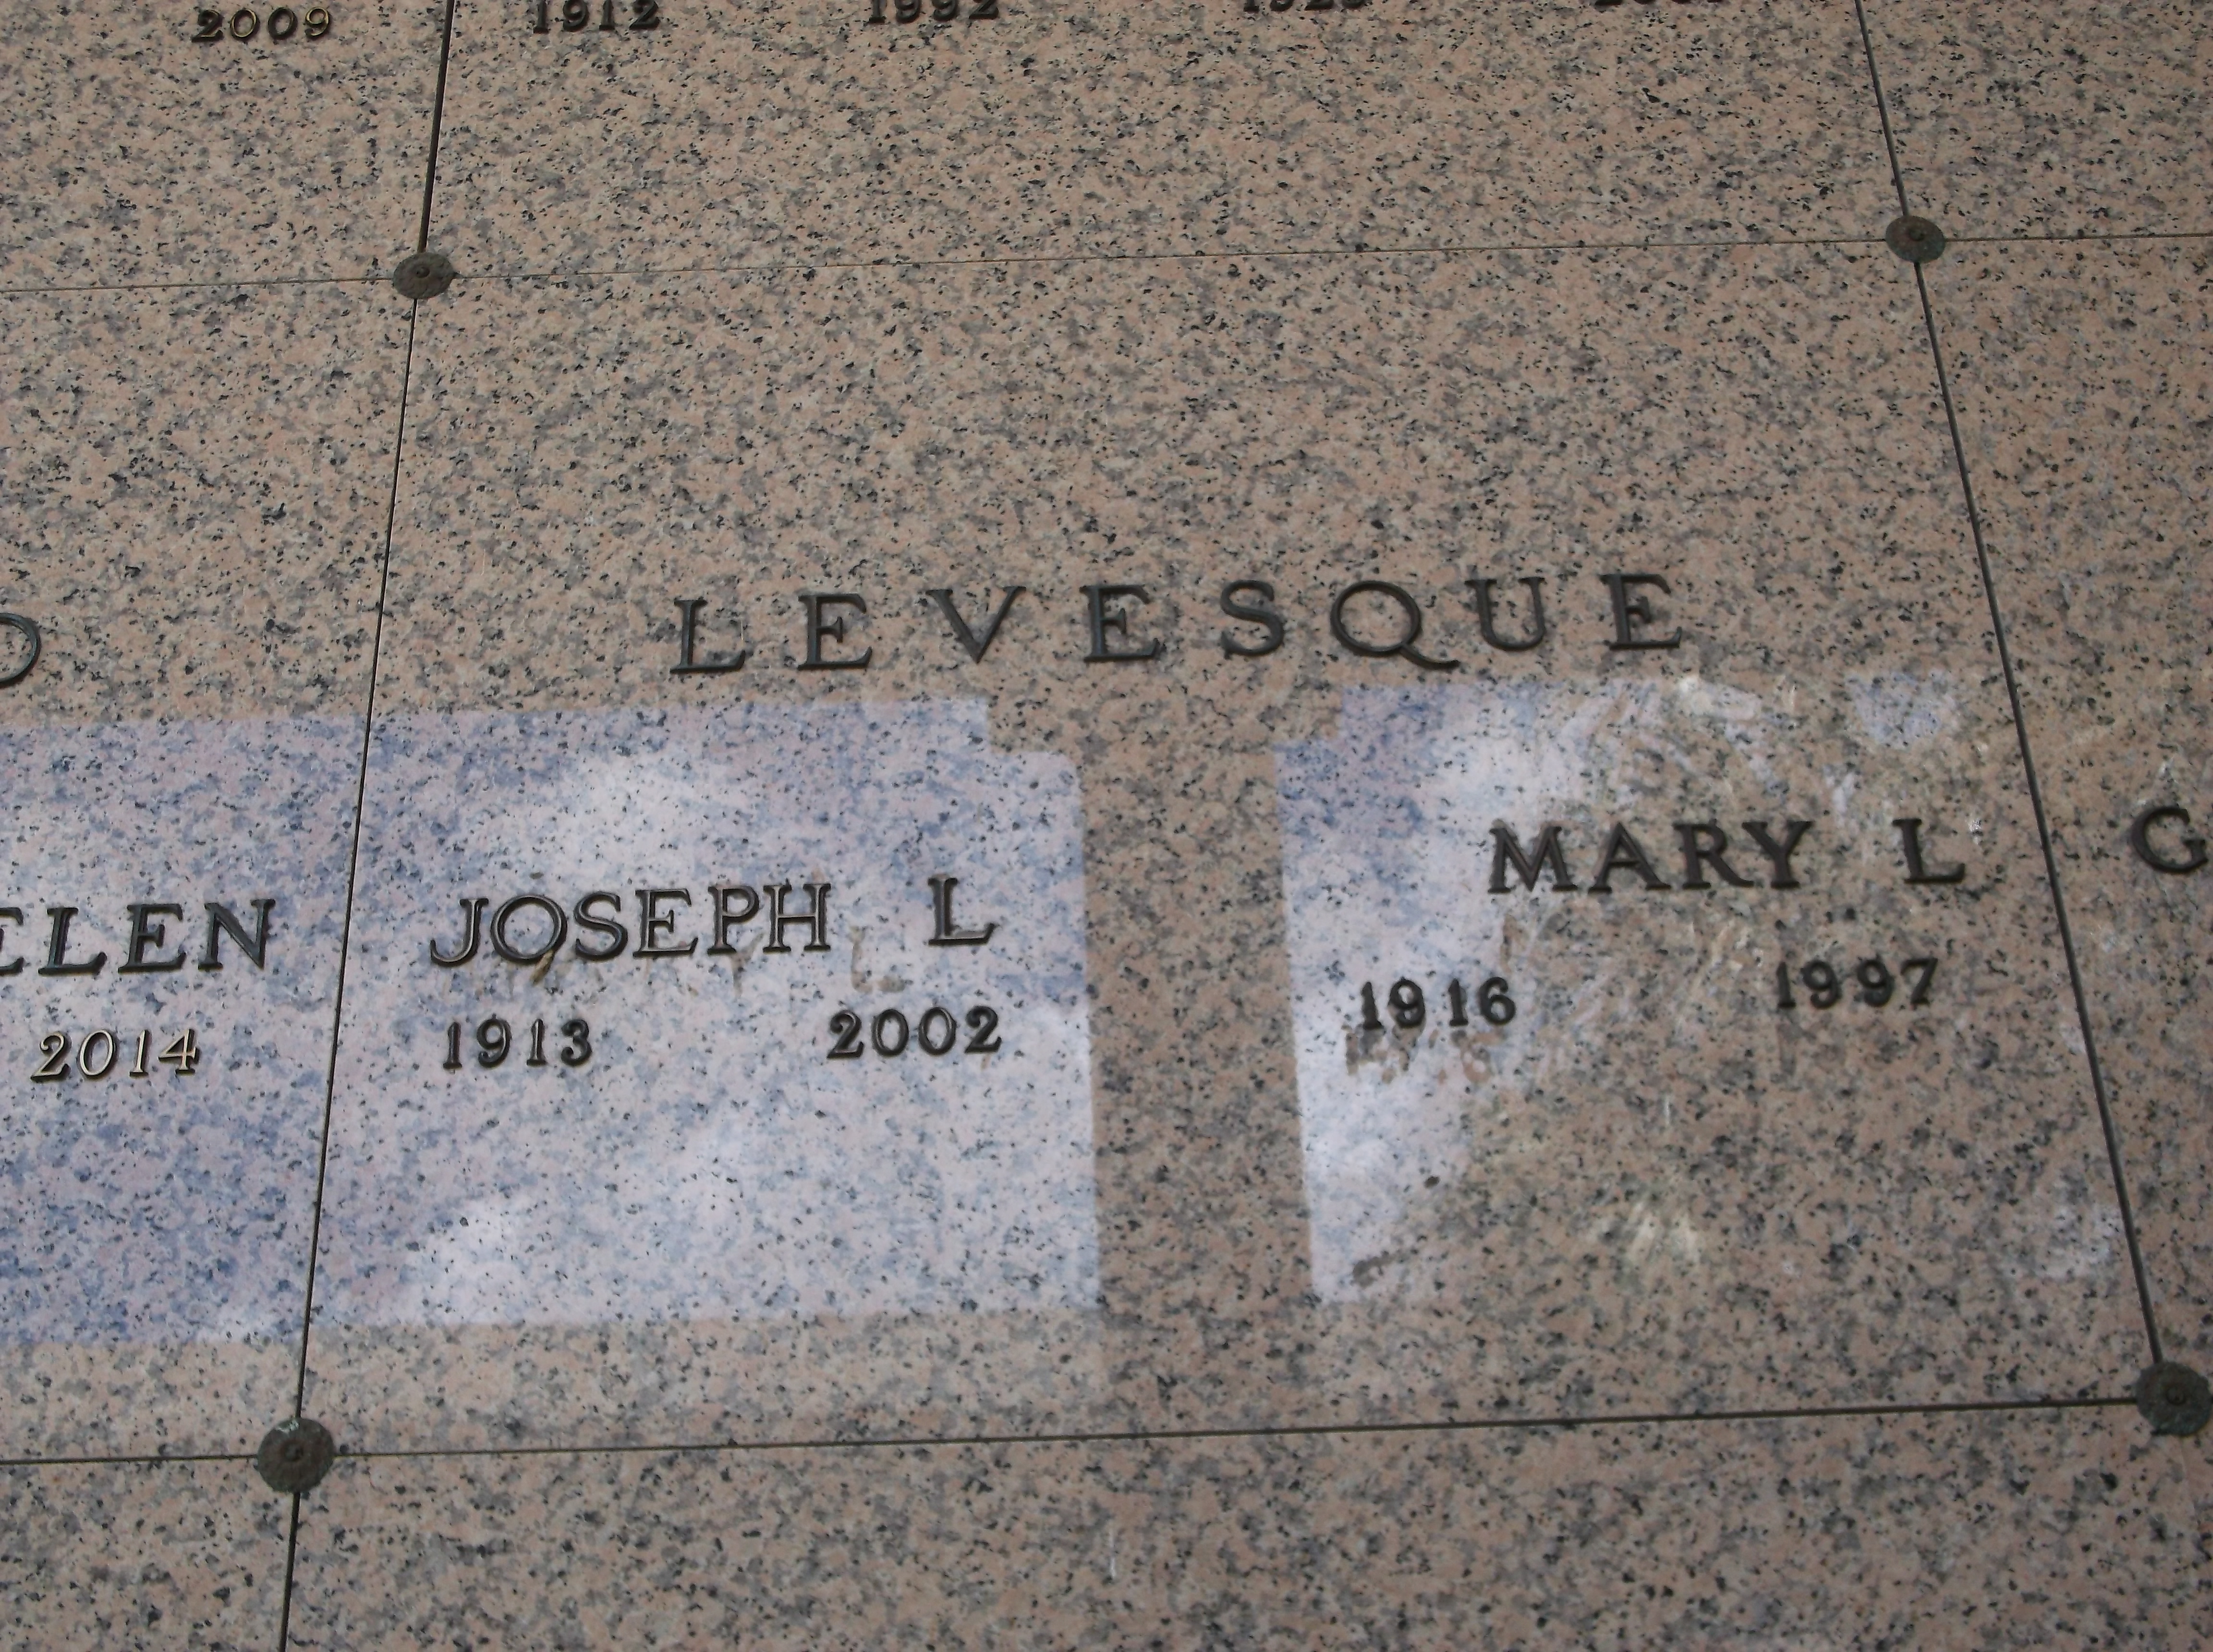 Mary L Levesque